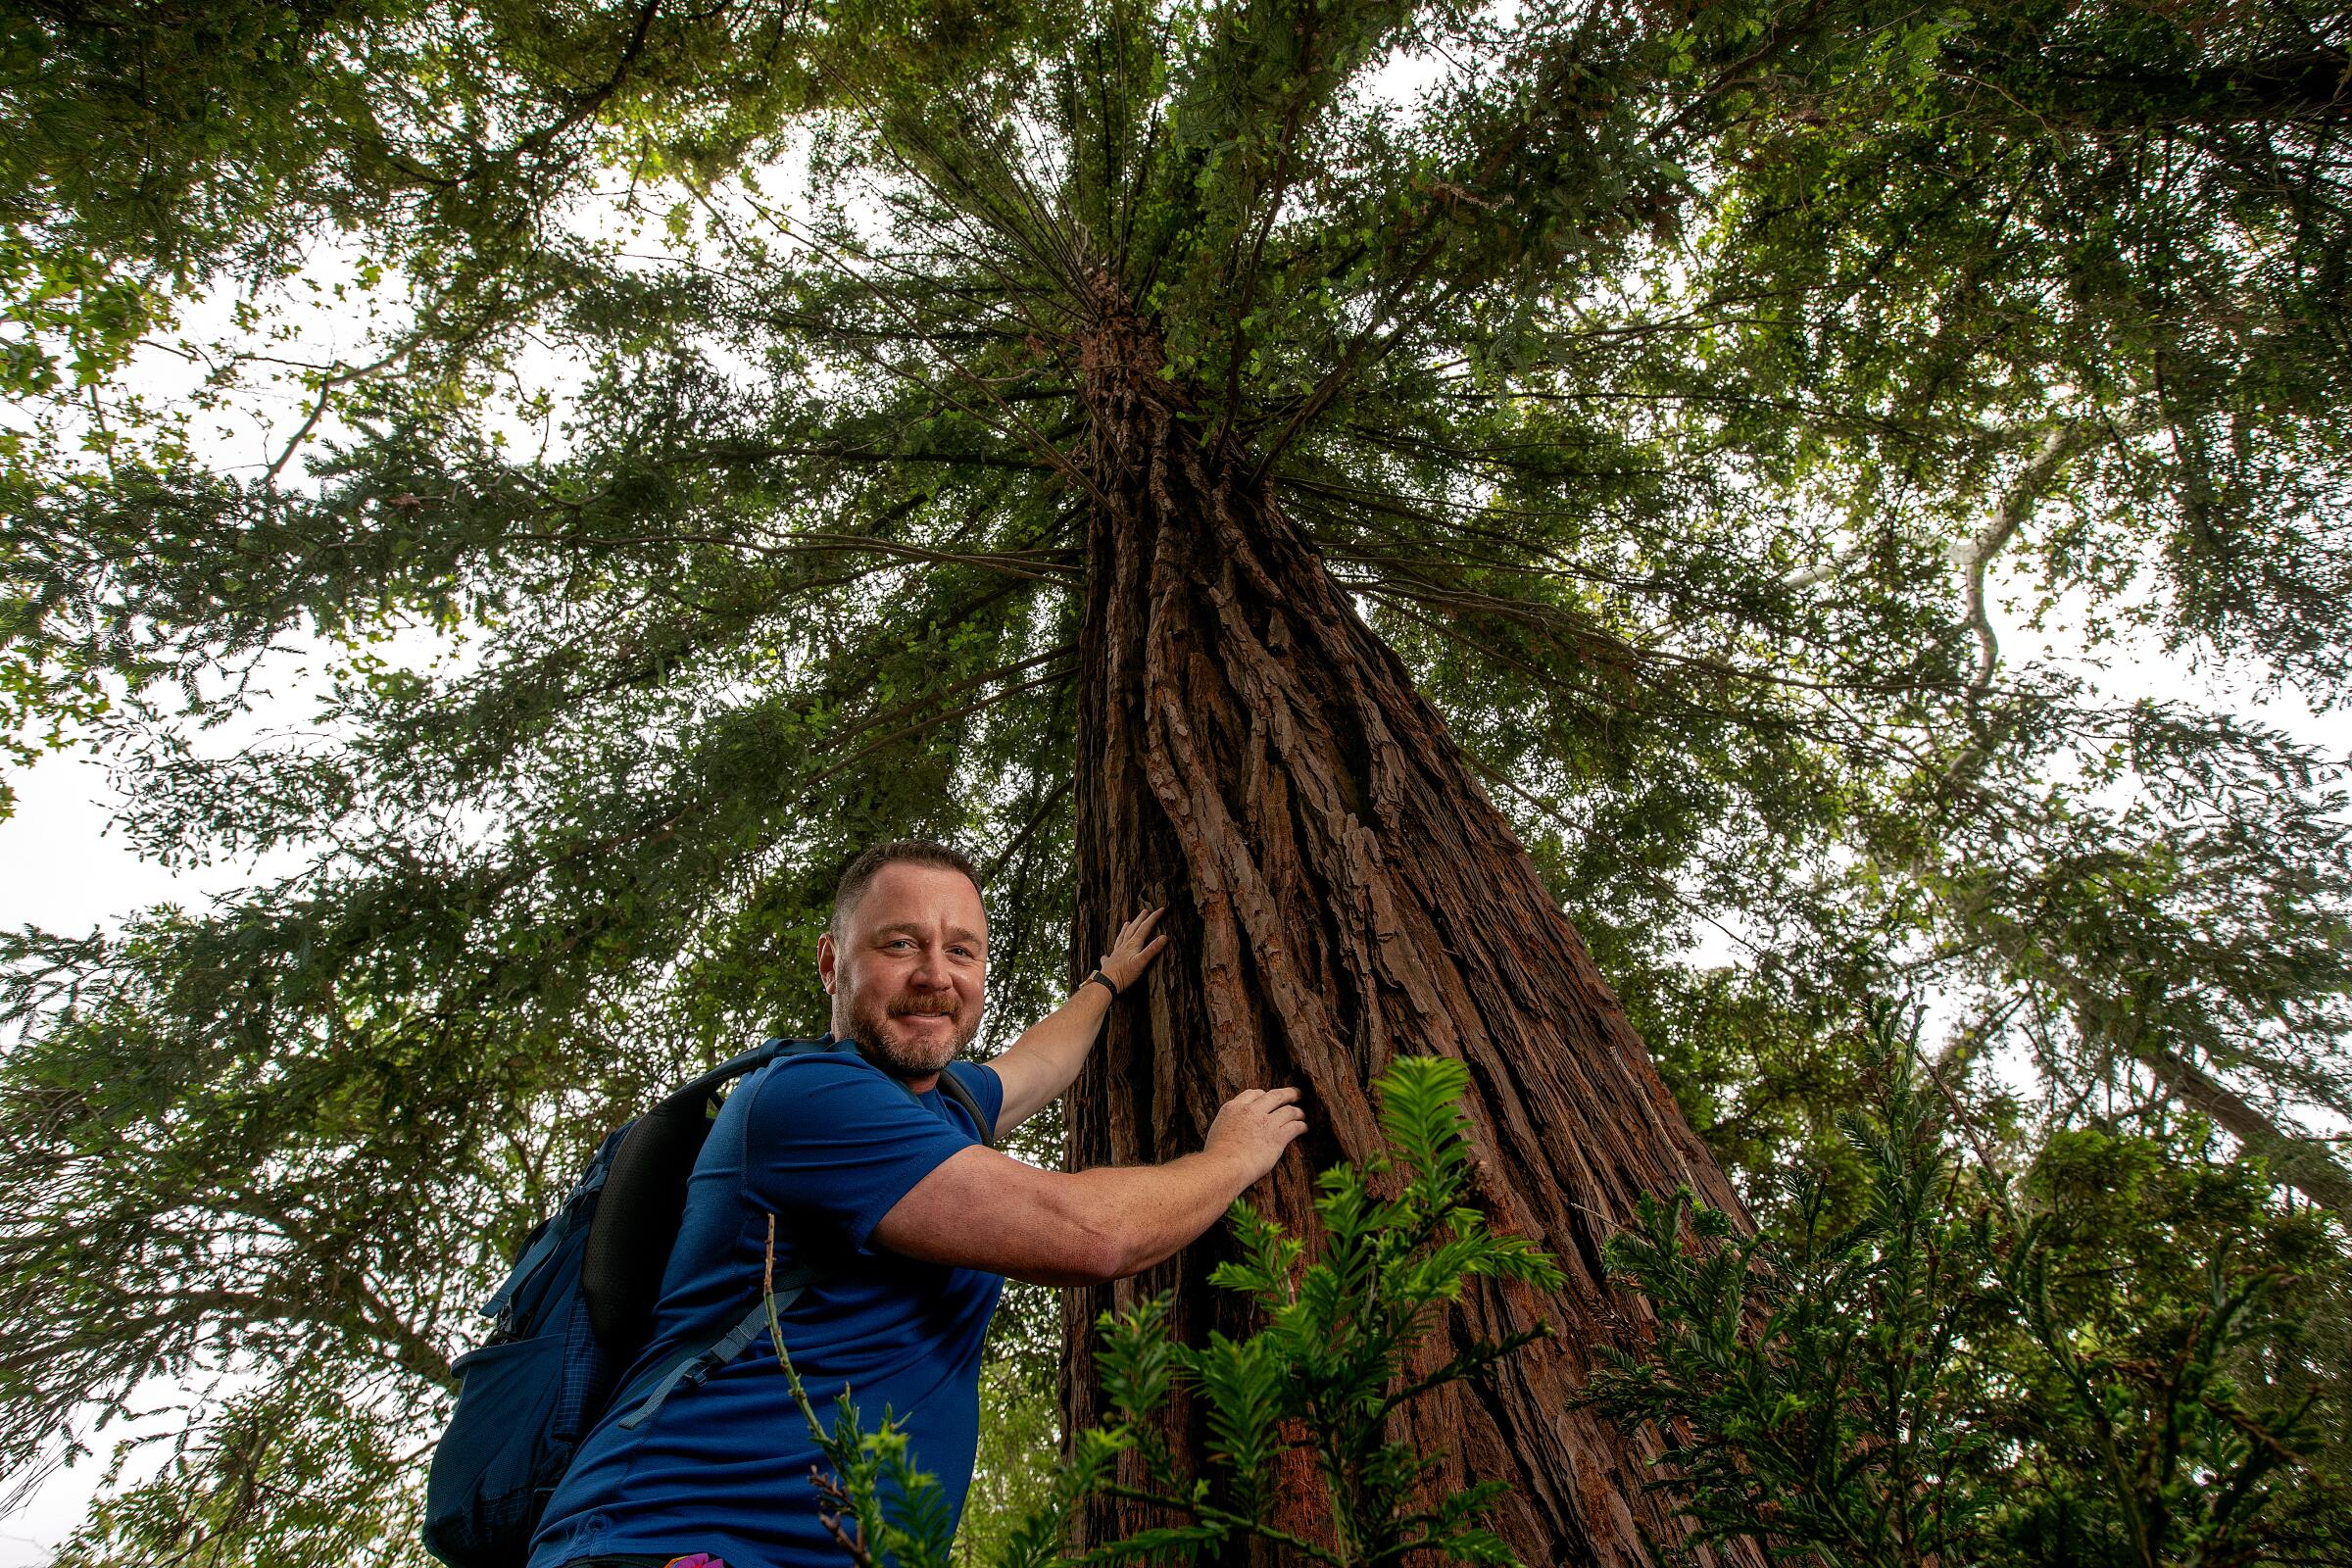 A man stands reaching up to touch the redwood tree that towers above him.